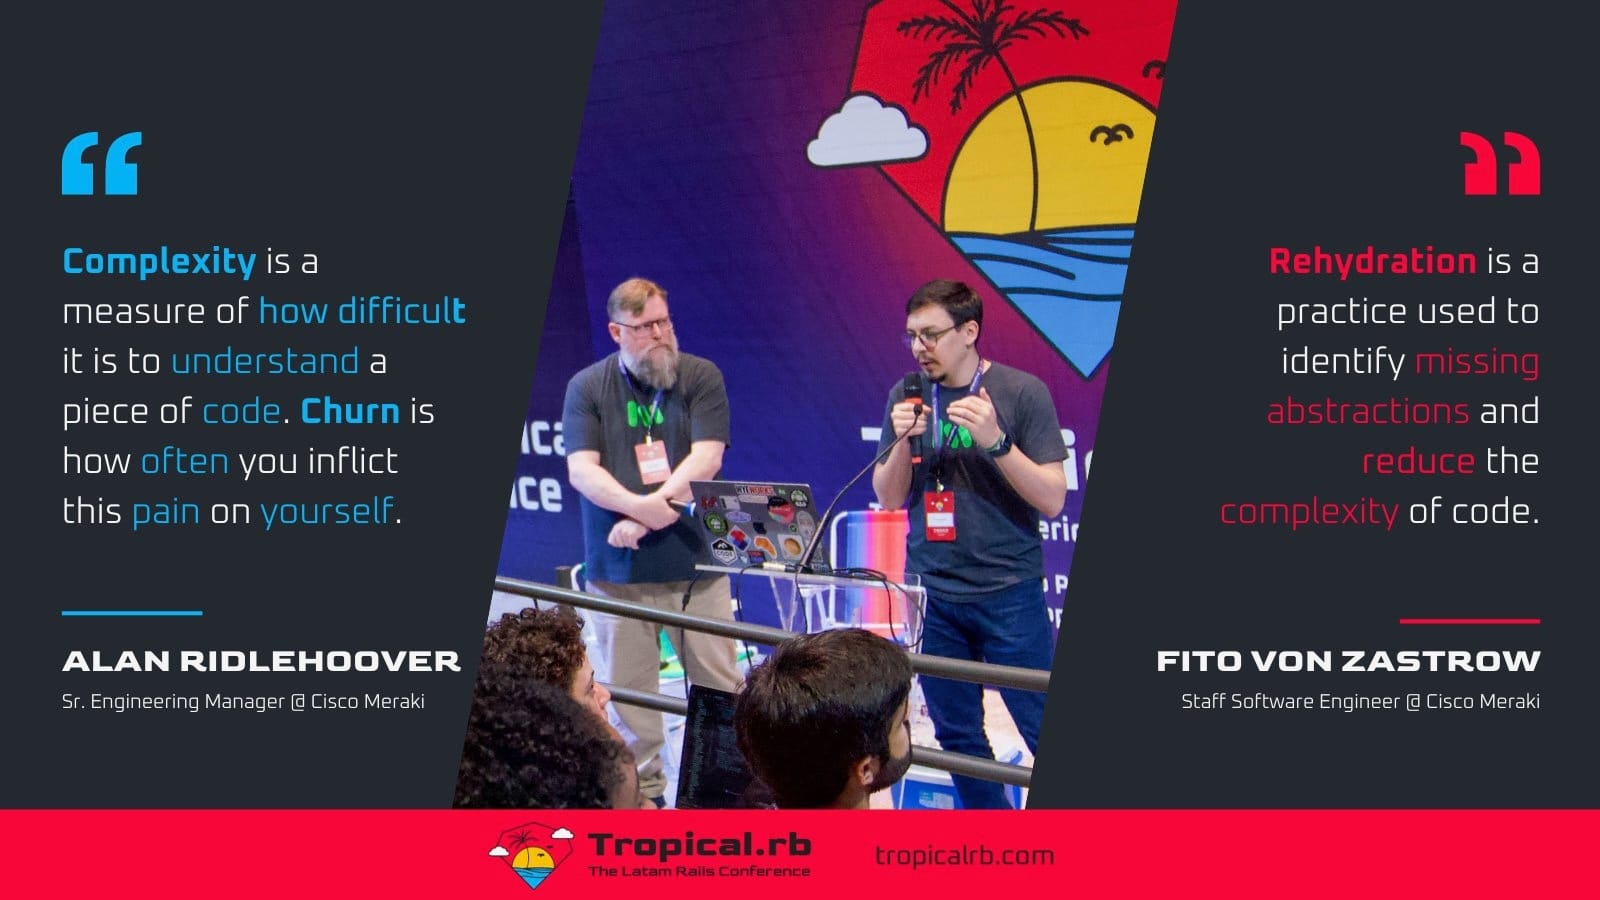 An image of Alan Ridlehoover and Fito von Zastrow speaking at Tropical.rb with quotes from each of them on either side of the image